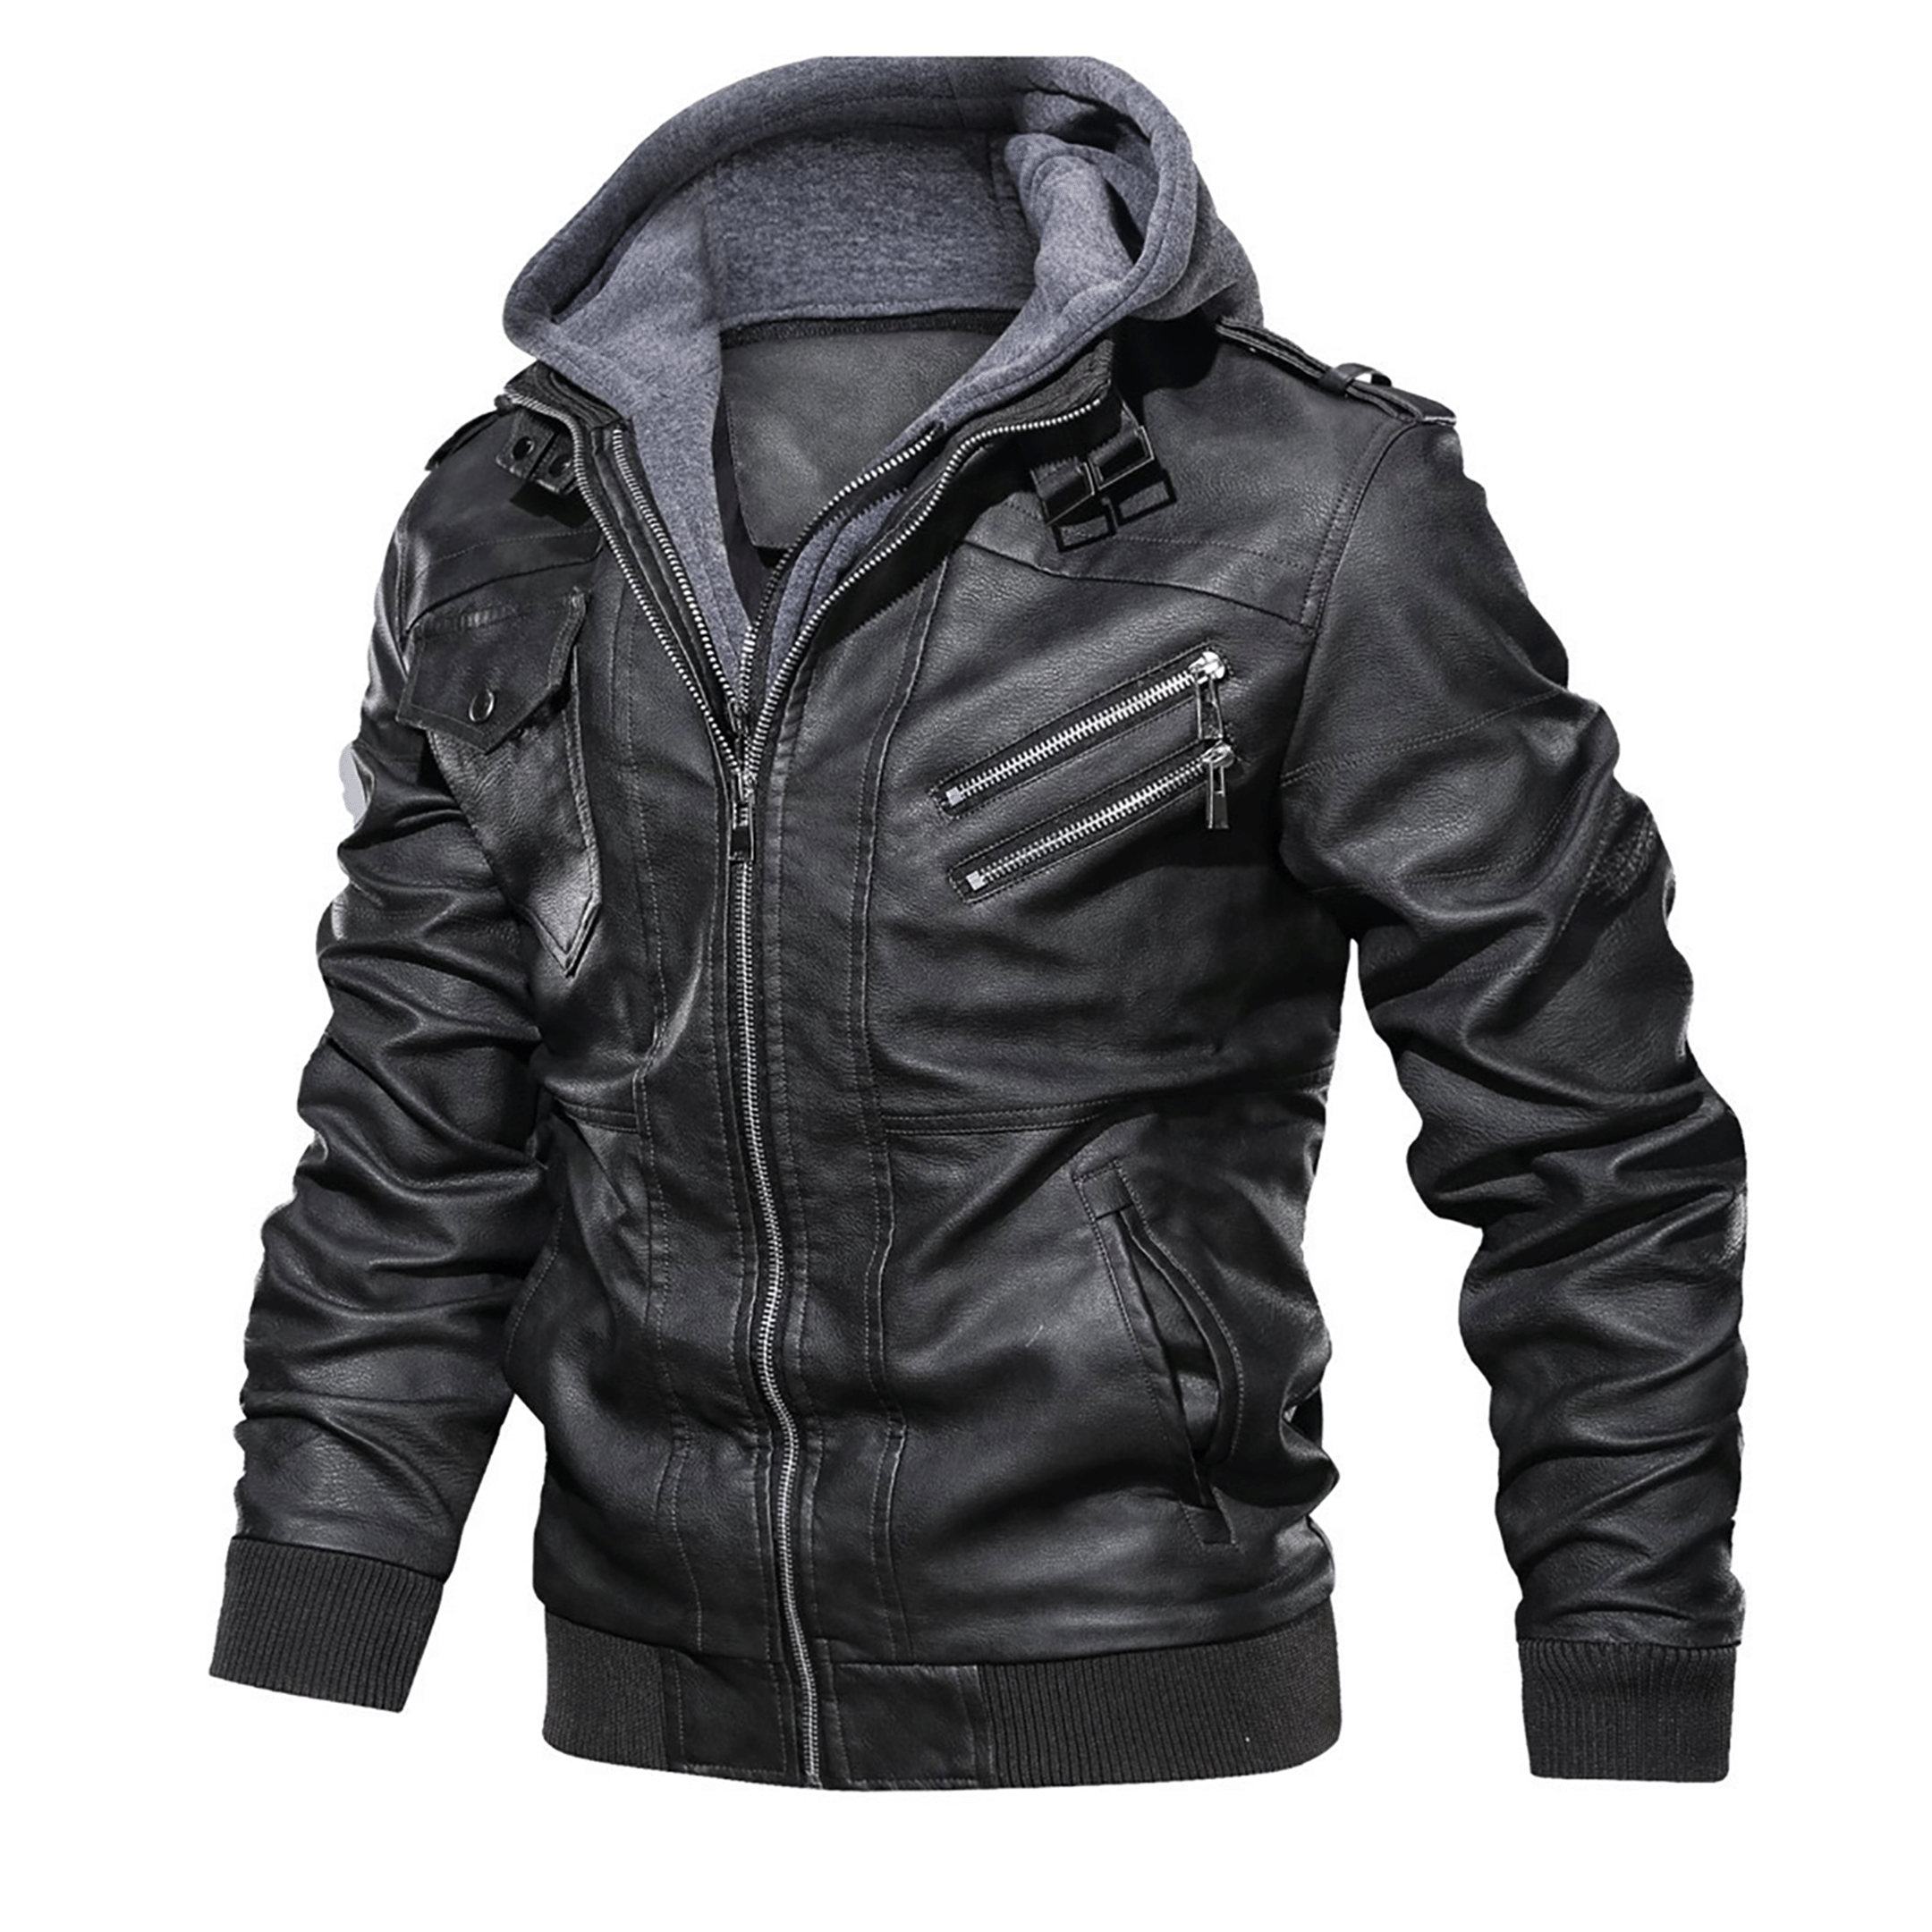 Top leather jackets and latest products 435